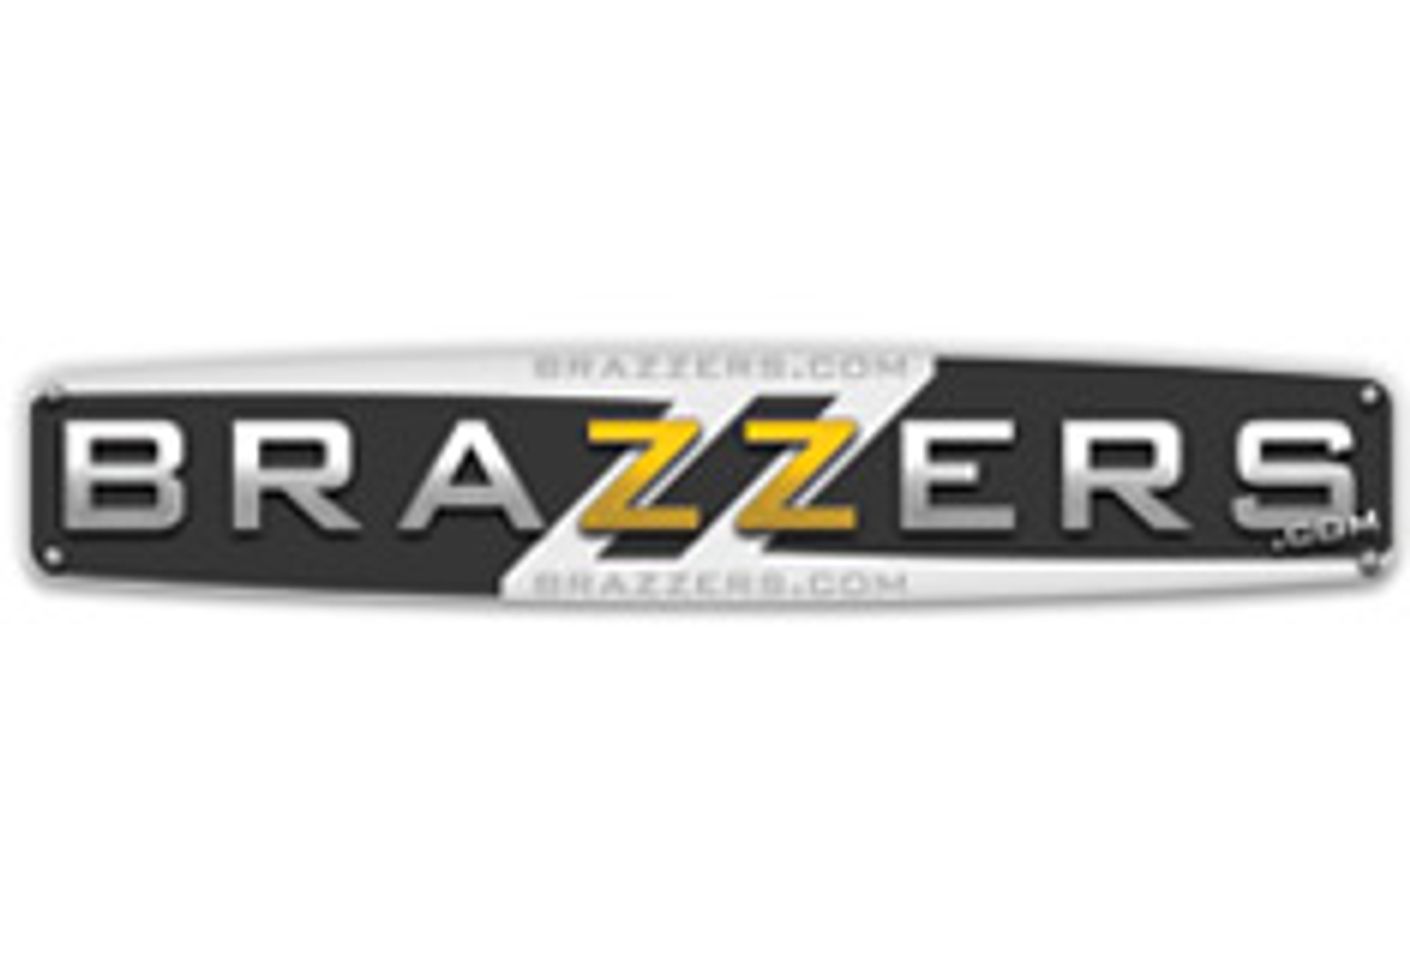 ATM LA, Brazzers Team-Up for Super Ball XLV Pre-Game Party